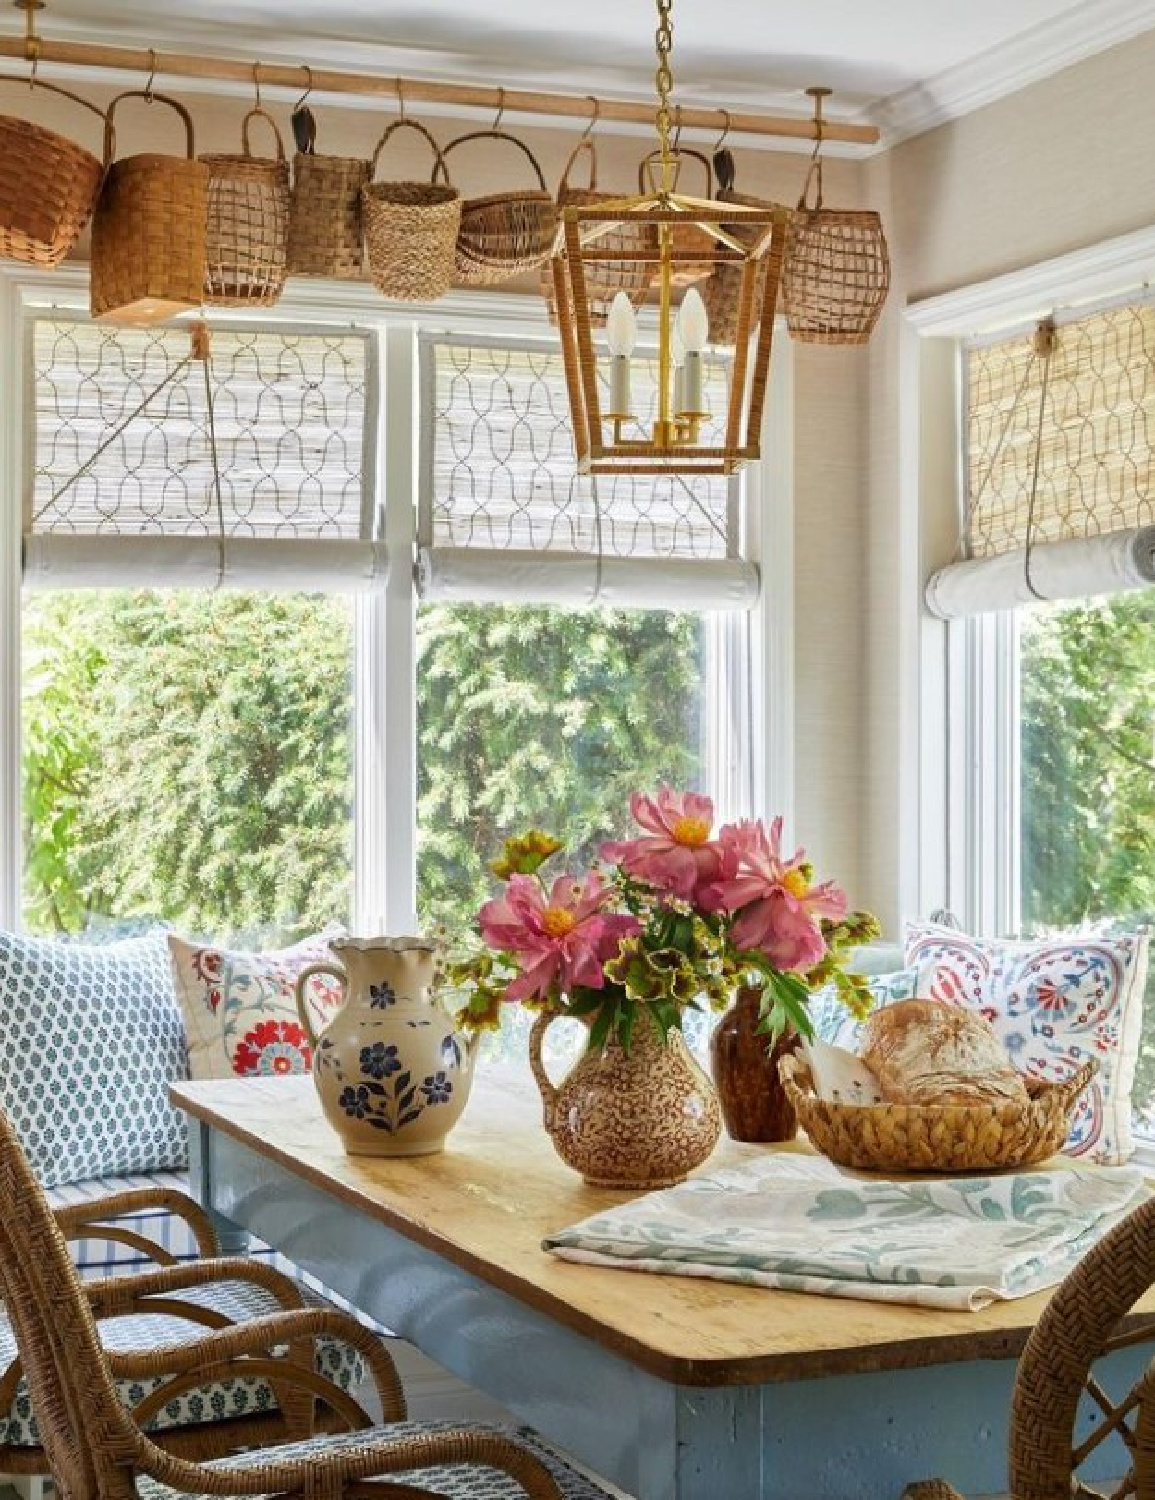 Beautiful modern vintage classic timeless kitchen with banquette, chick blinds, and vintage baskets. @stephperezstudio